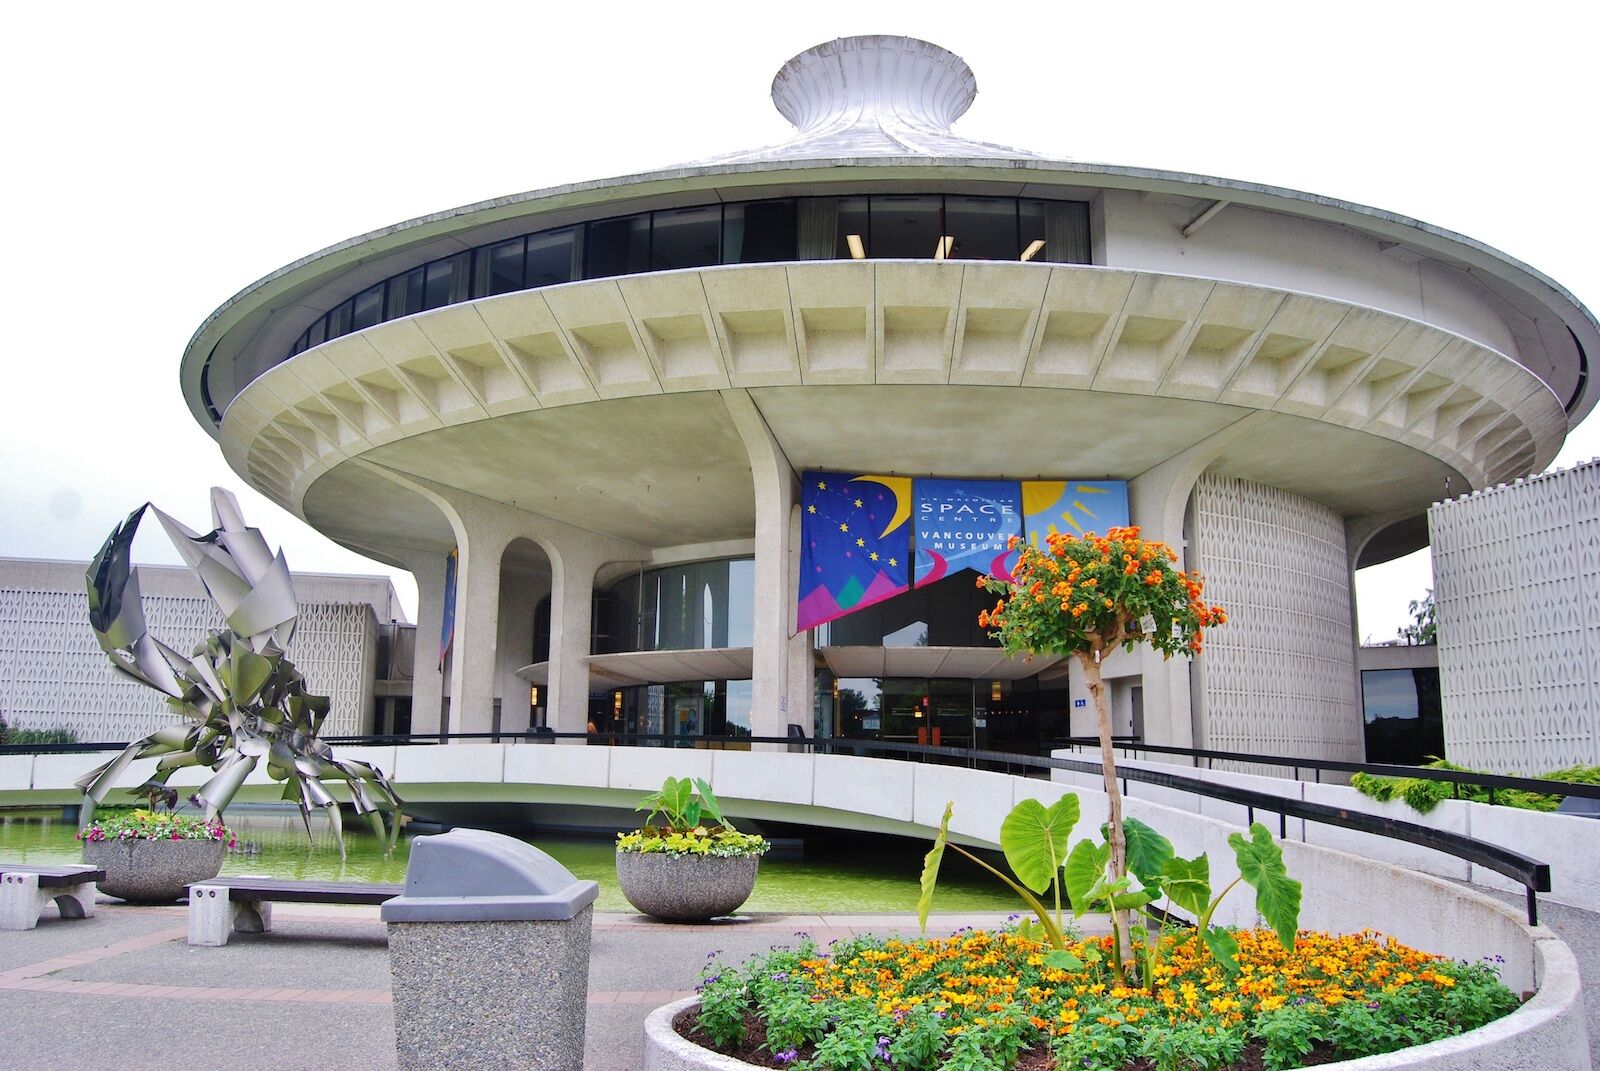 The H.R MacMillan Space Centre, one of the best museums in Vancouver